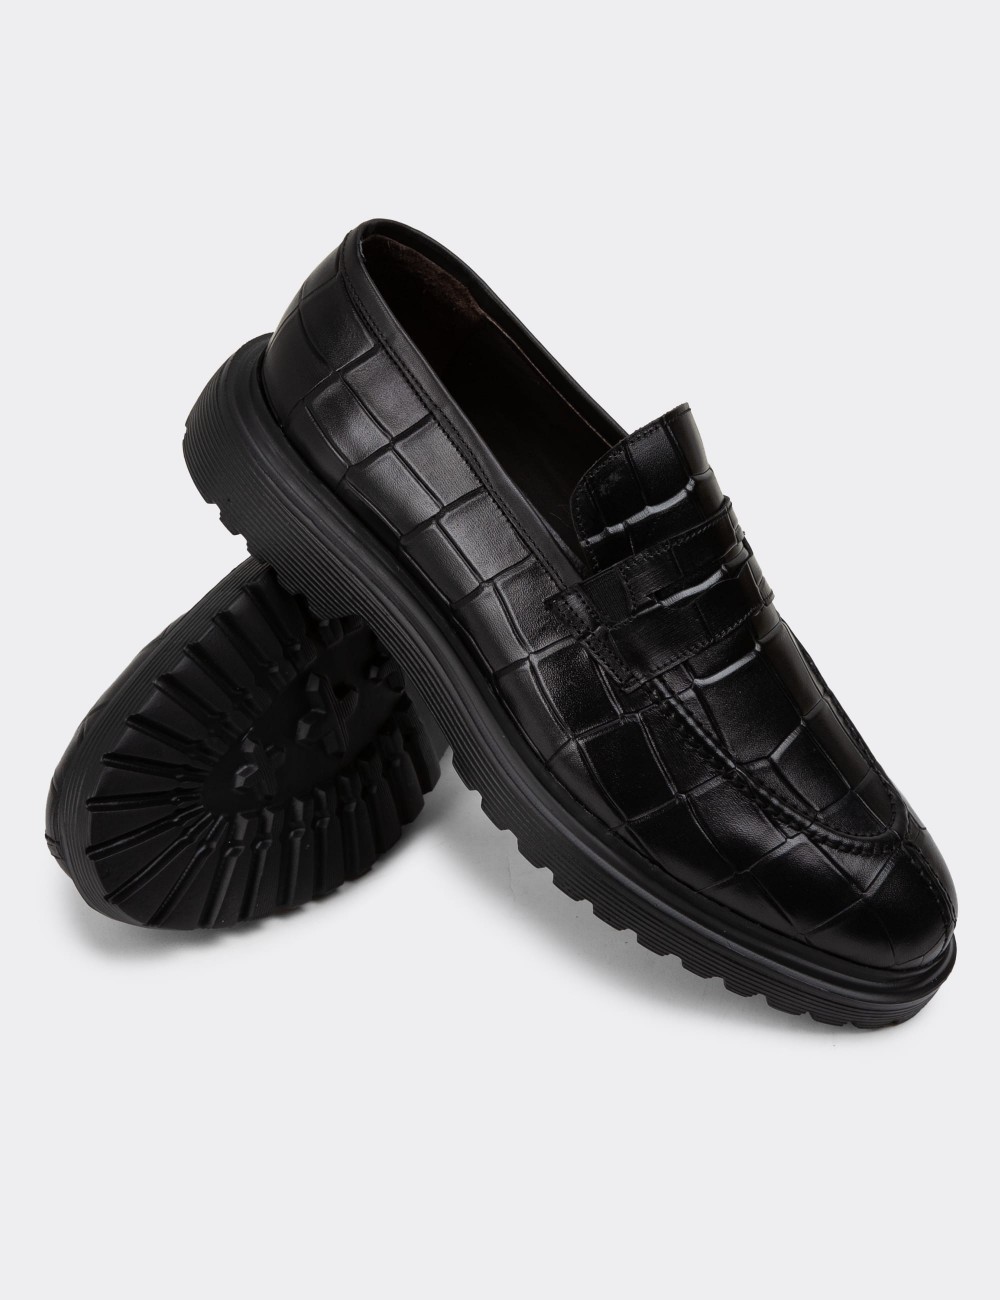 Black Leather Loafers Shoes - 01878MSYHE03